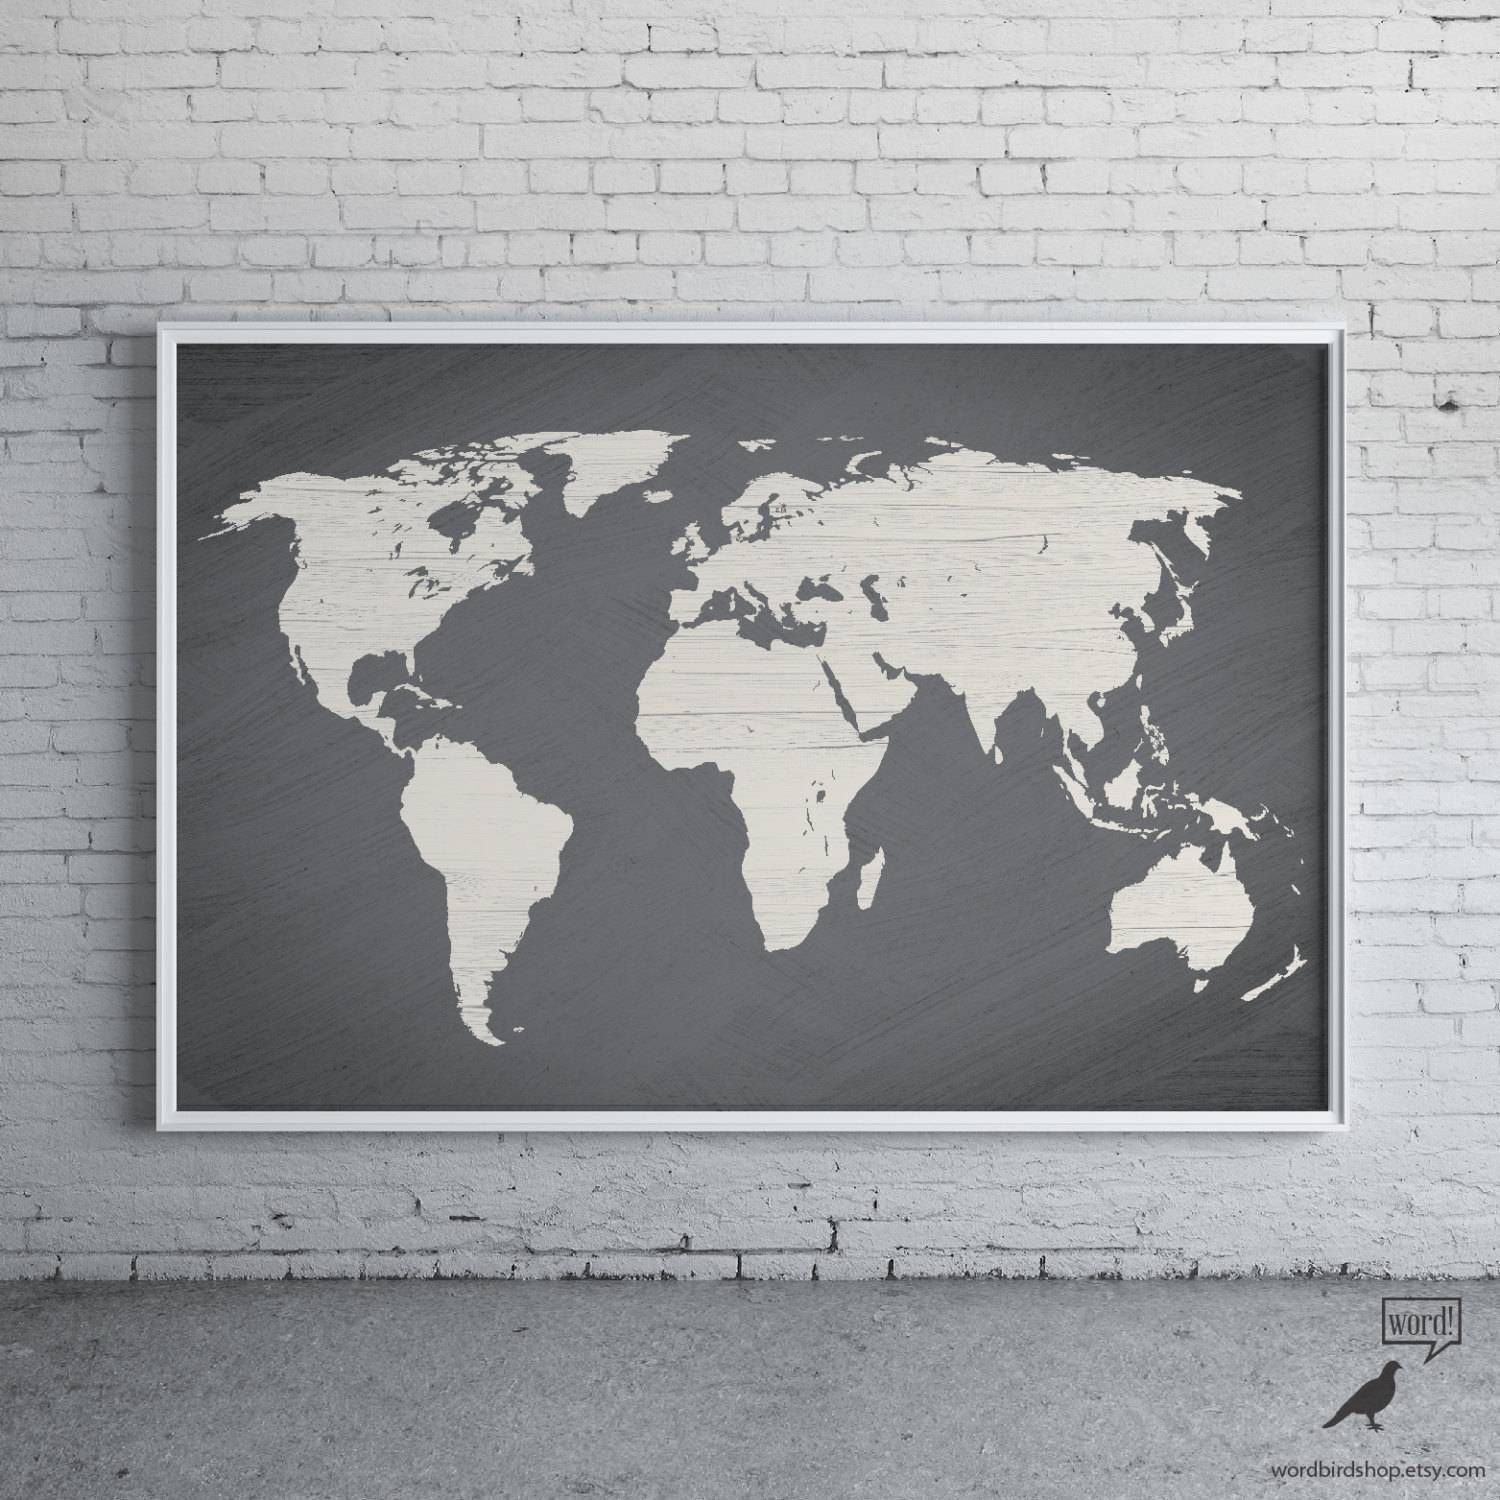 Wall26 Com Art Prints Framed Canvas Greeting And World Map Wall With Recent World Map Wall Art Framed (View 13 of 20)